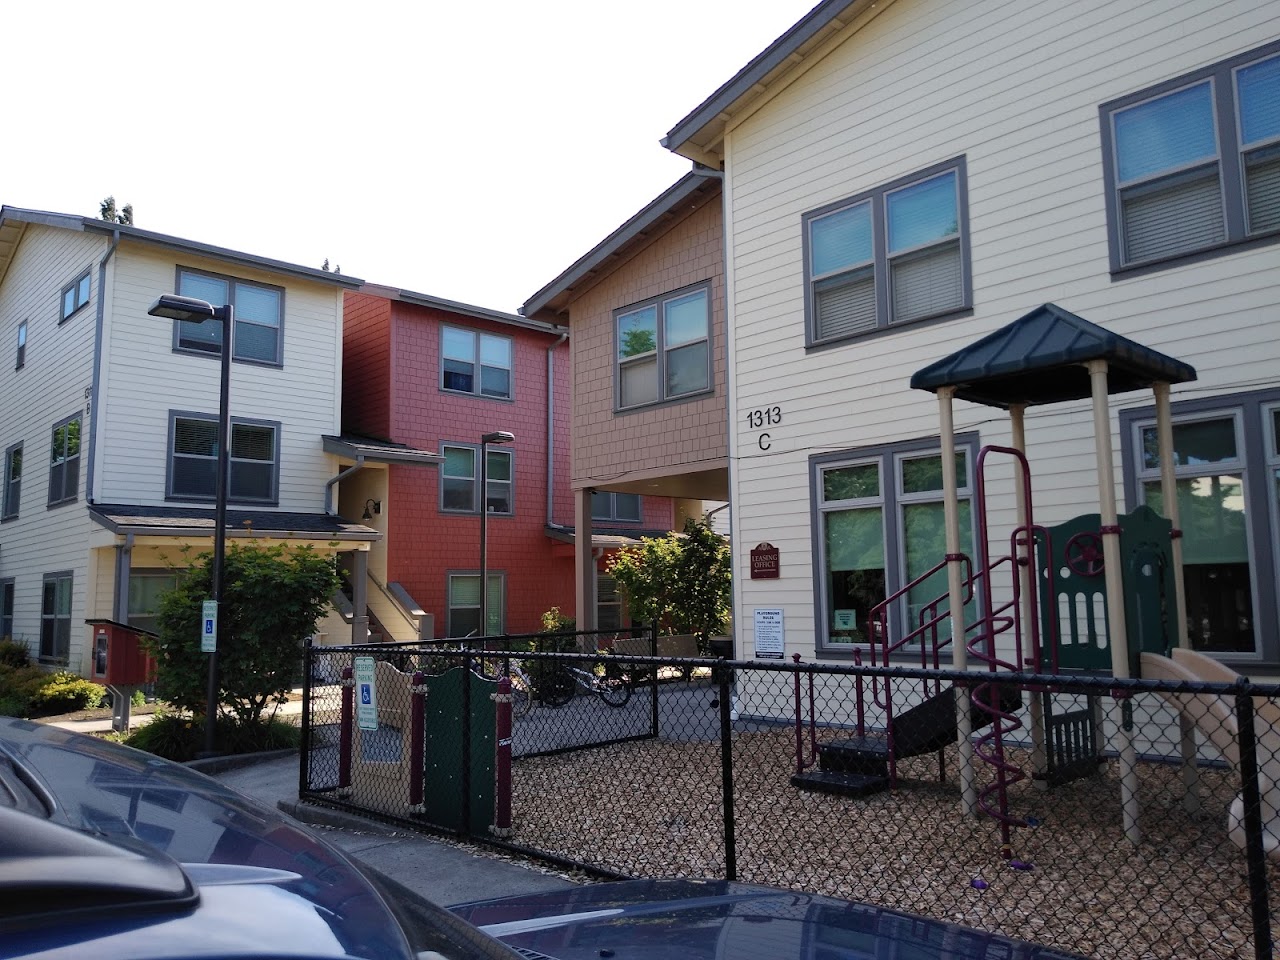 Photo of LILAC PLACE APARTMENTS. Affordable housing located at 1313 GLENWOOD STREET WOODLAND, WA 98674